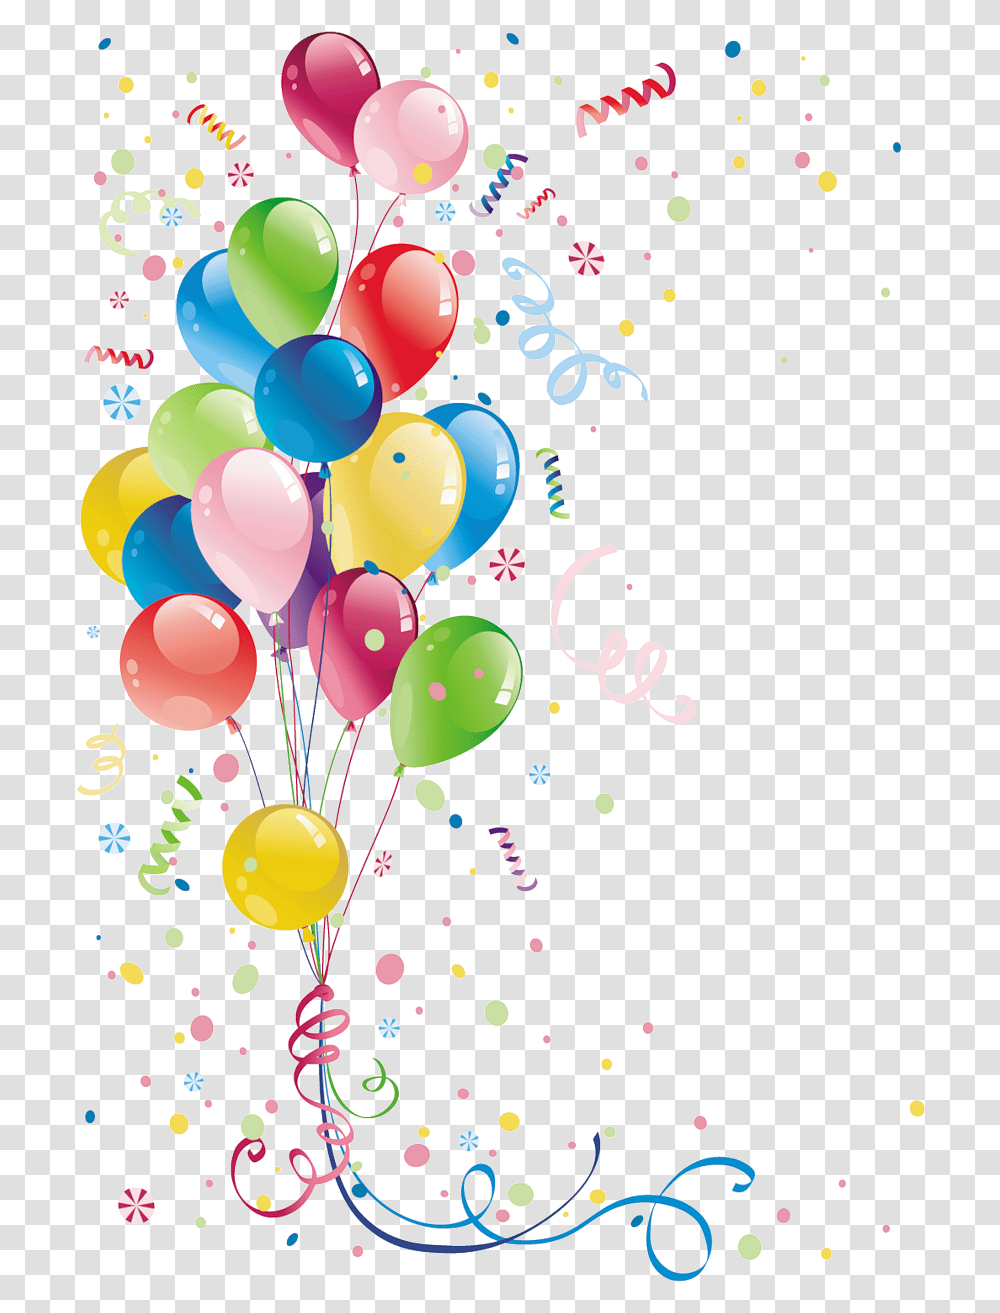 Library Of Heart Confetti Clip Art Royalty Free Stock Clipart Anniversaire, Balloon, Graphics, Paper, Floral Design Transparent Png